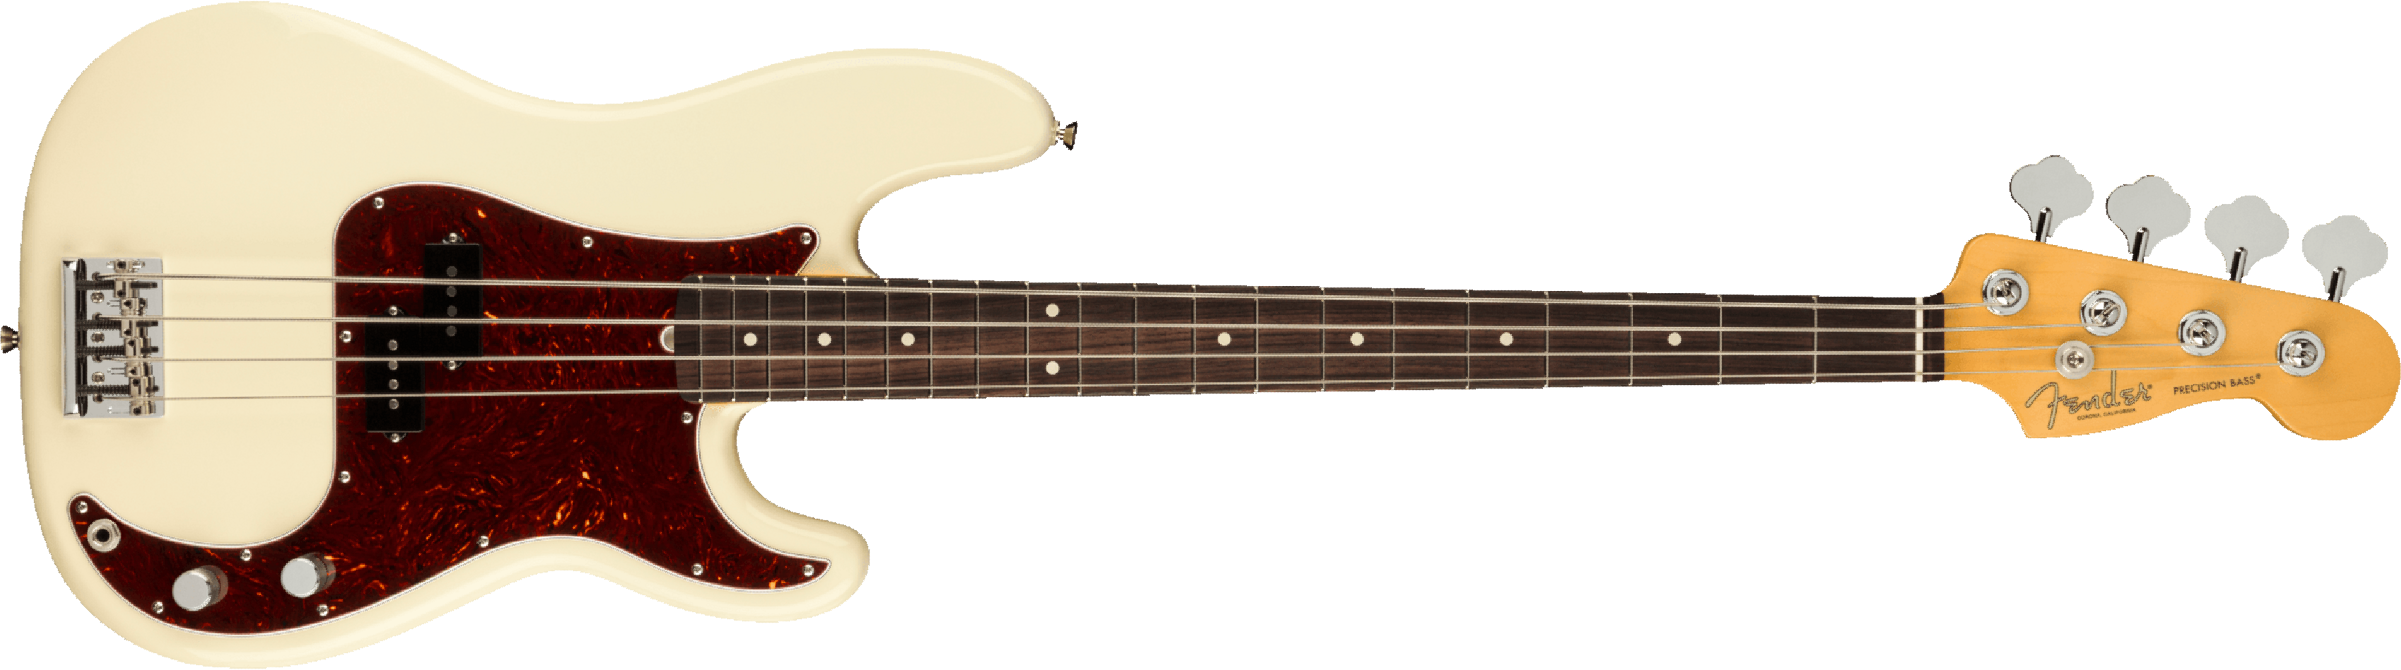 Fender Precision Bass American Professional Ii Usa Rw - Olympic White - Basse Électrique Solid Body - Main picture